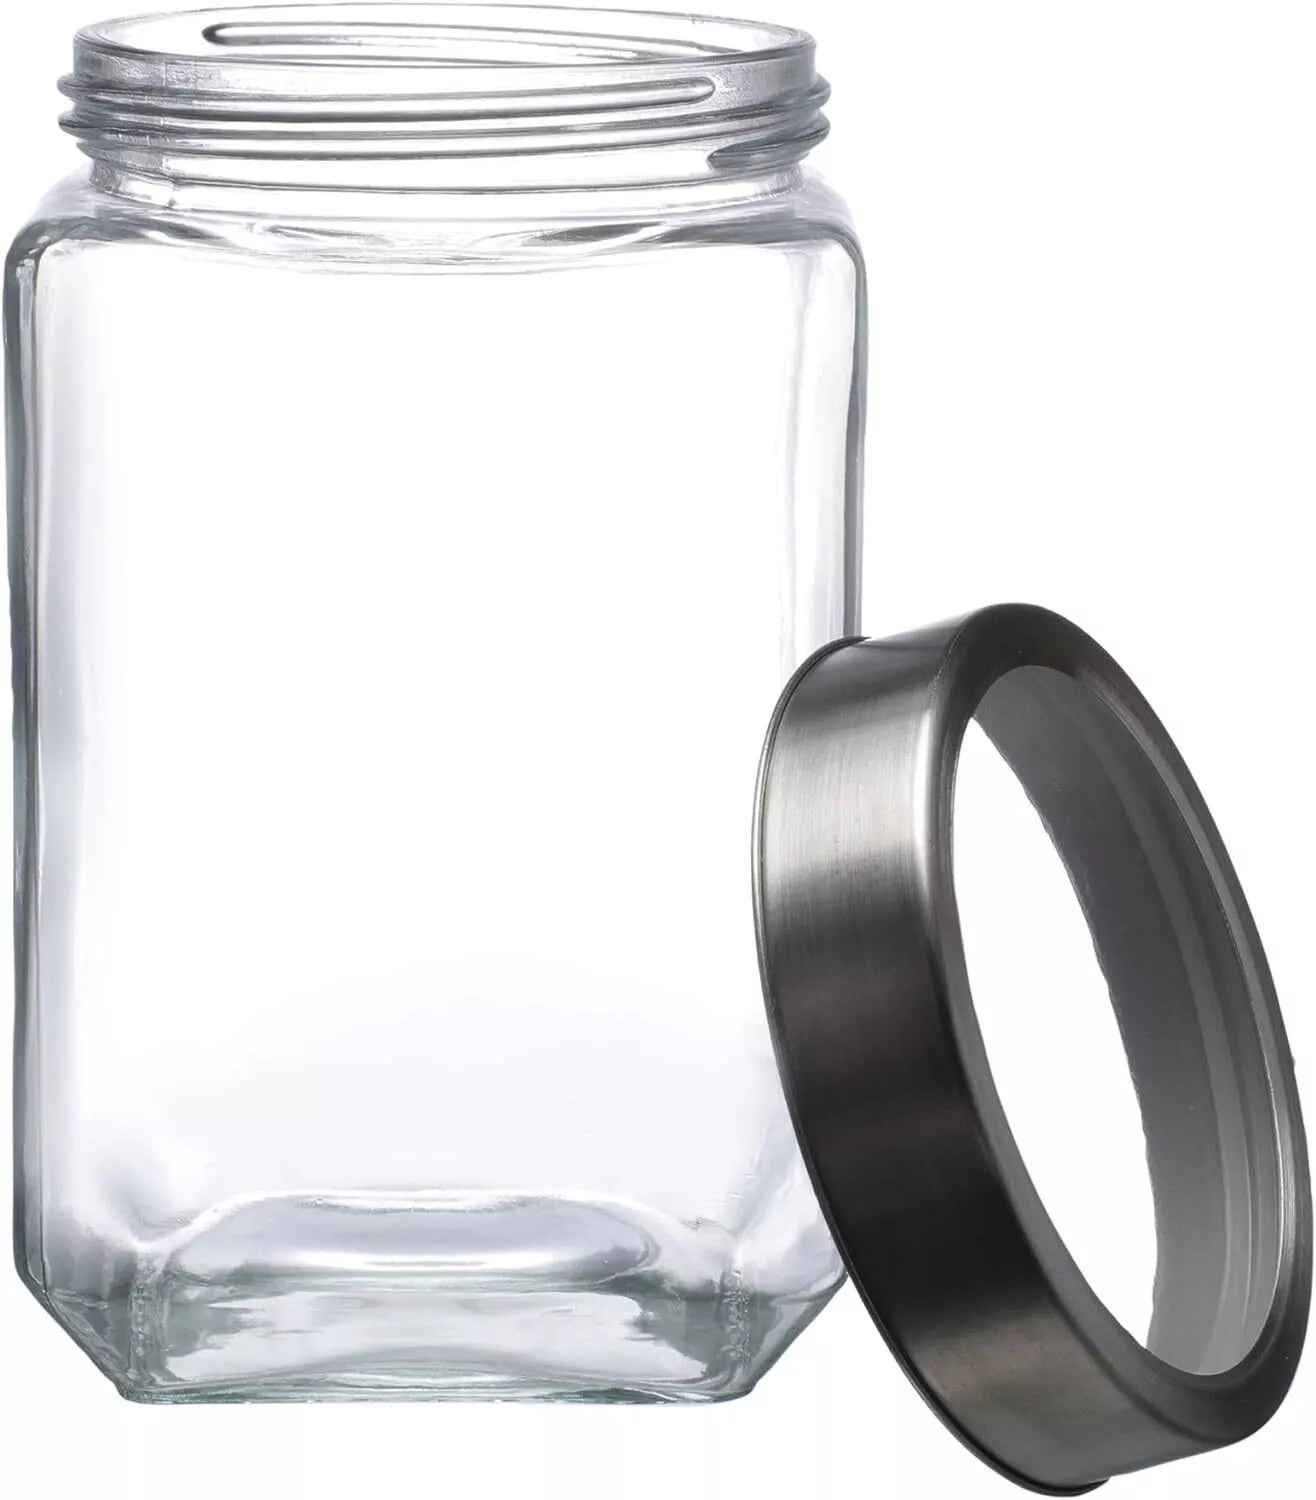 Glass Food Storage Jar with airtight lid Transparent Barni for Kitchen, Aachar Pickle, Dal, Dry Fruits, cookies, nuts